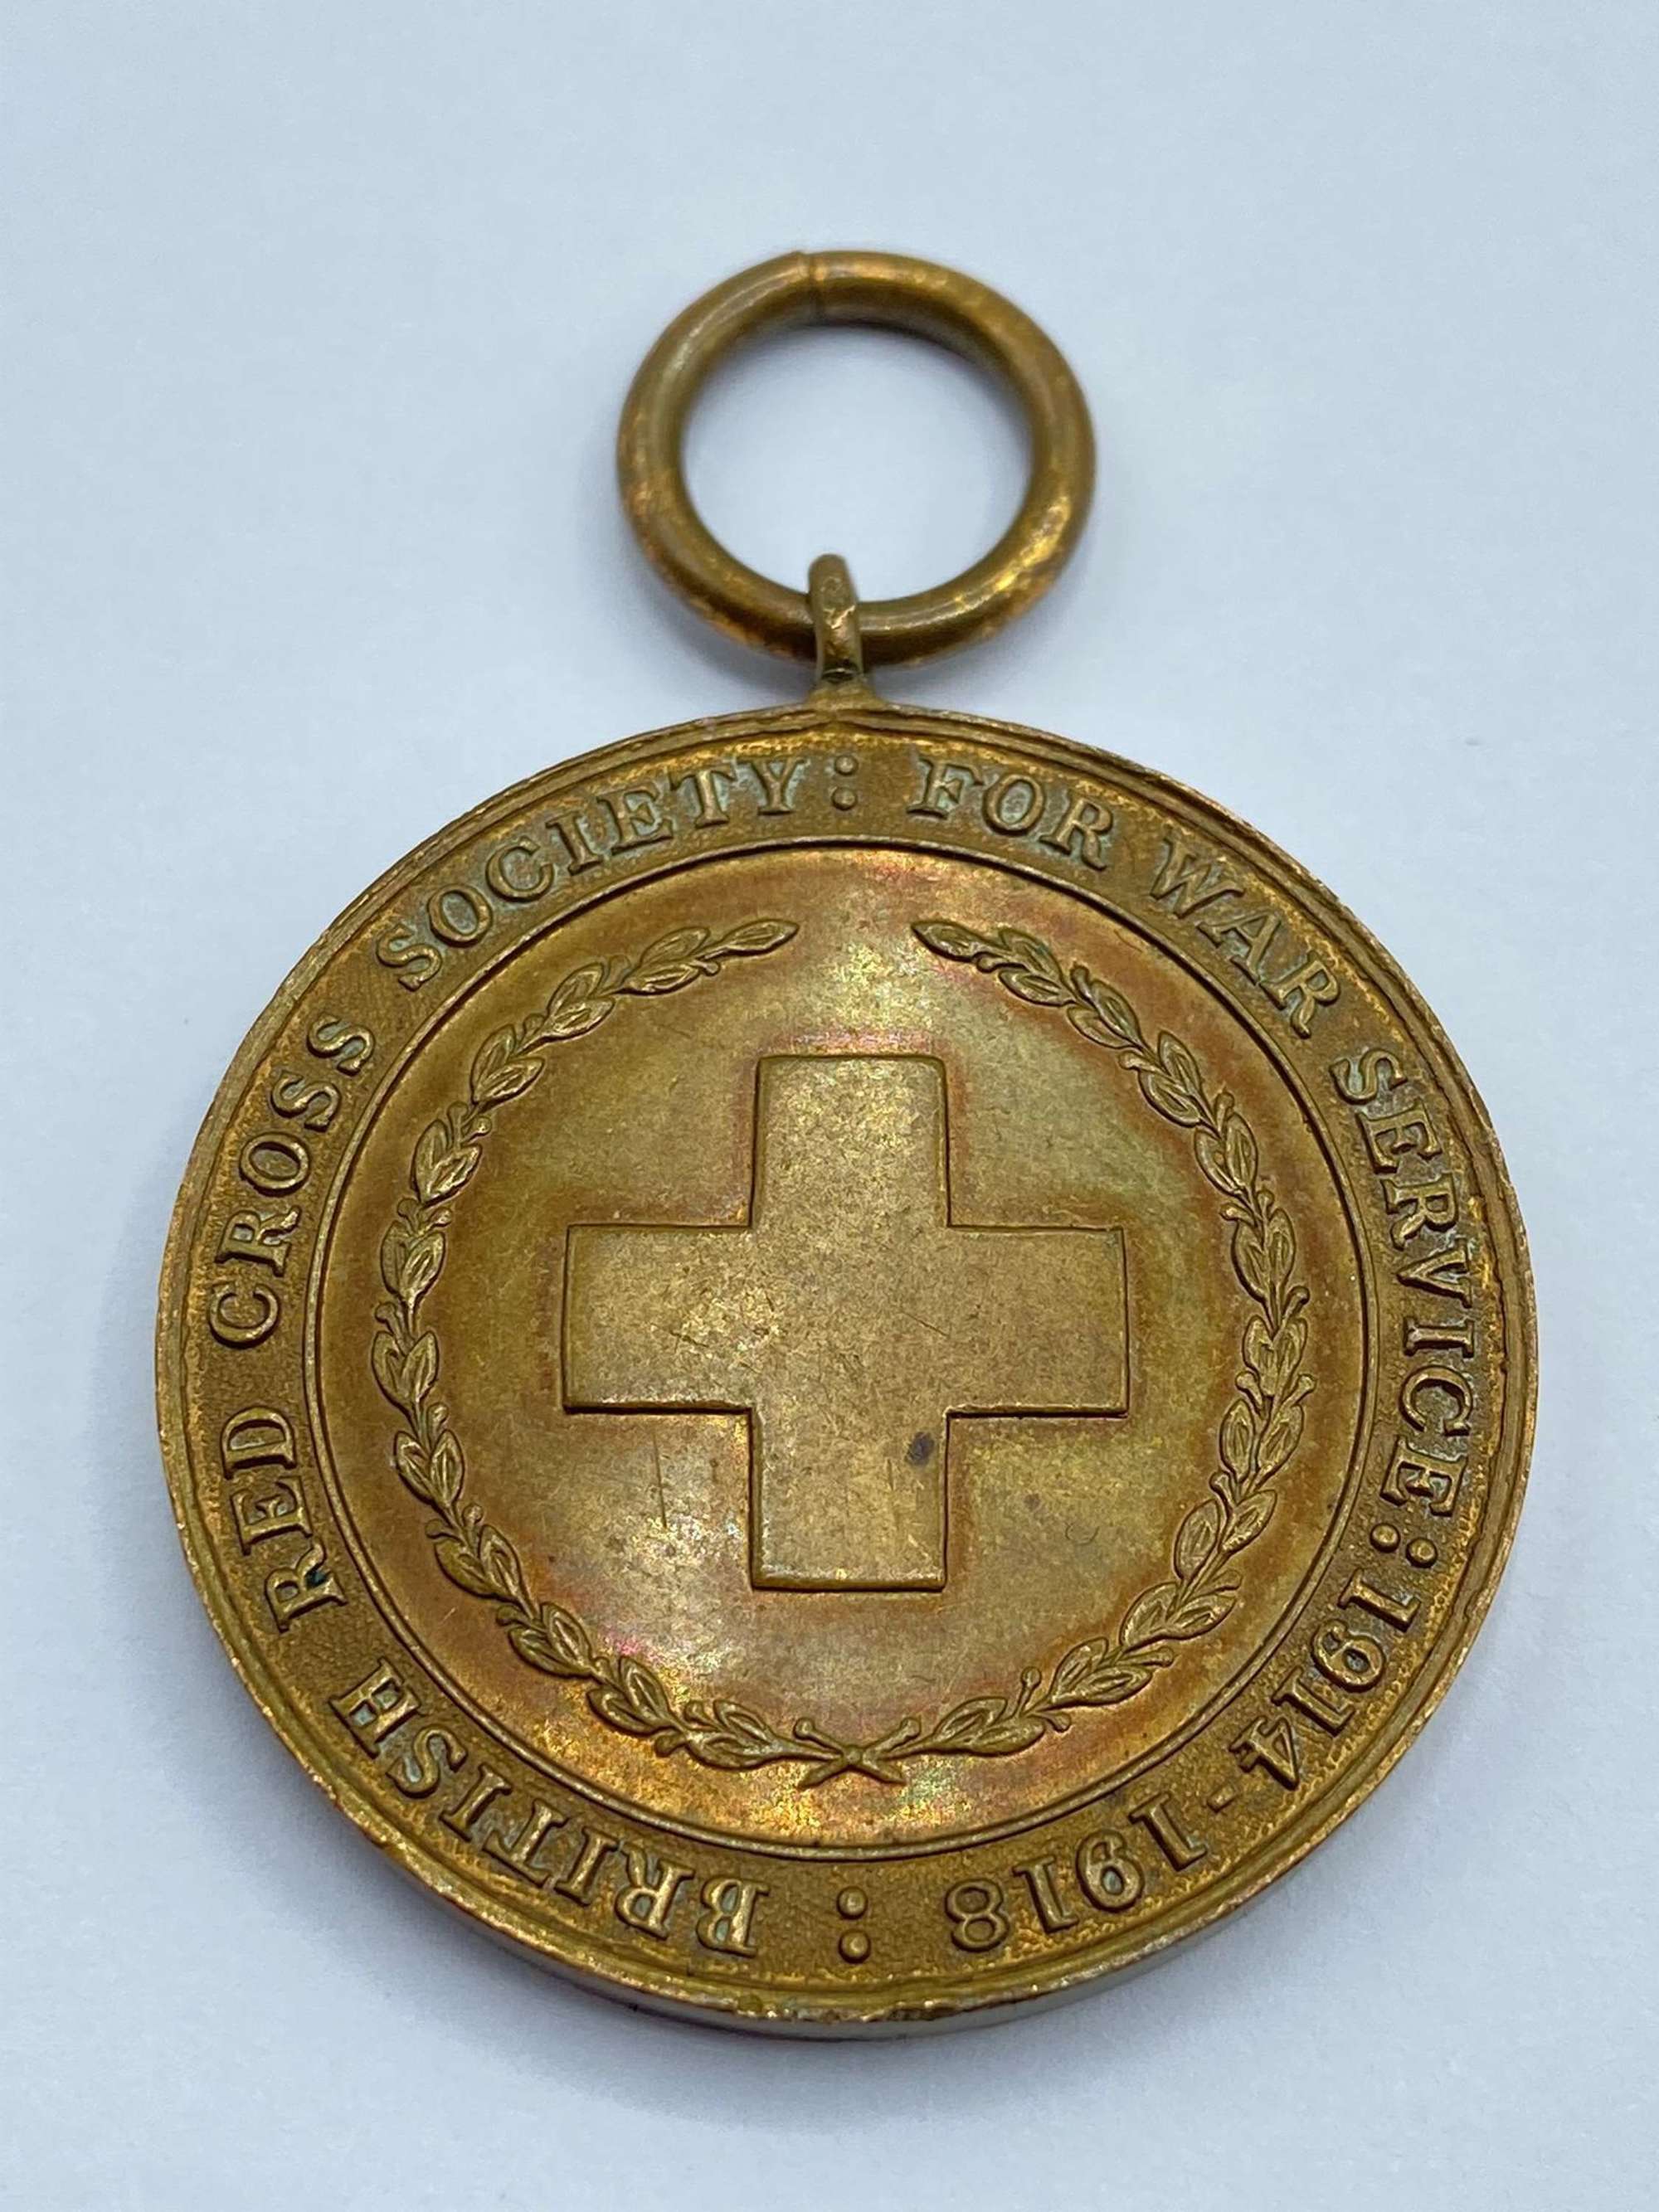 WW1 British Red Cross Society For War Service 1914-18 Medal